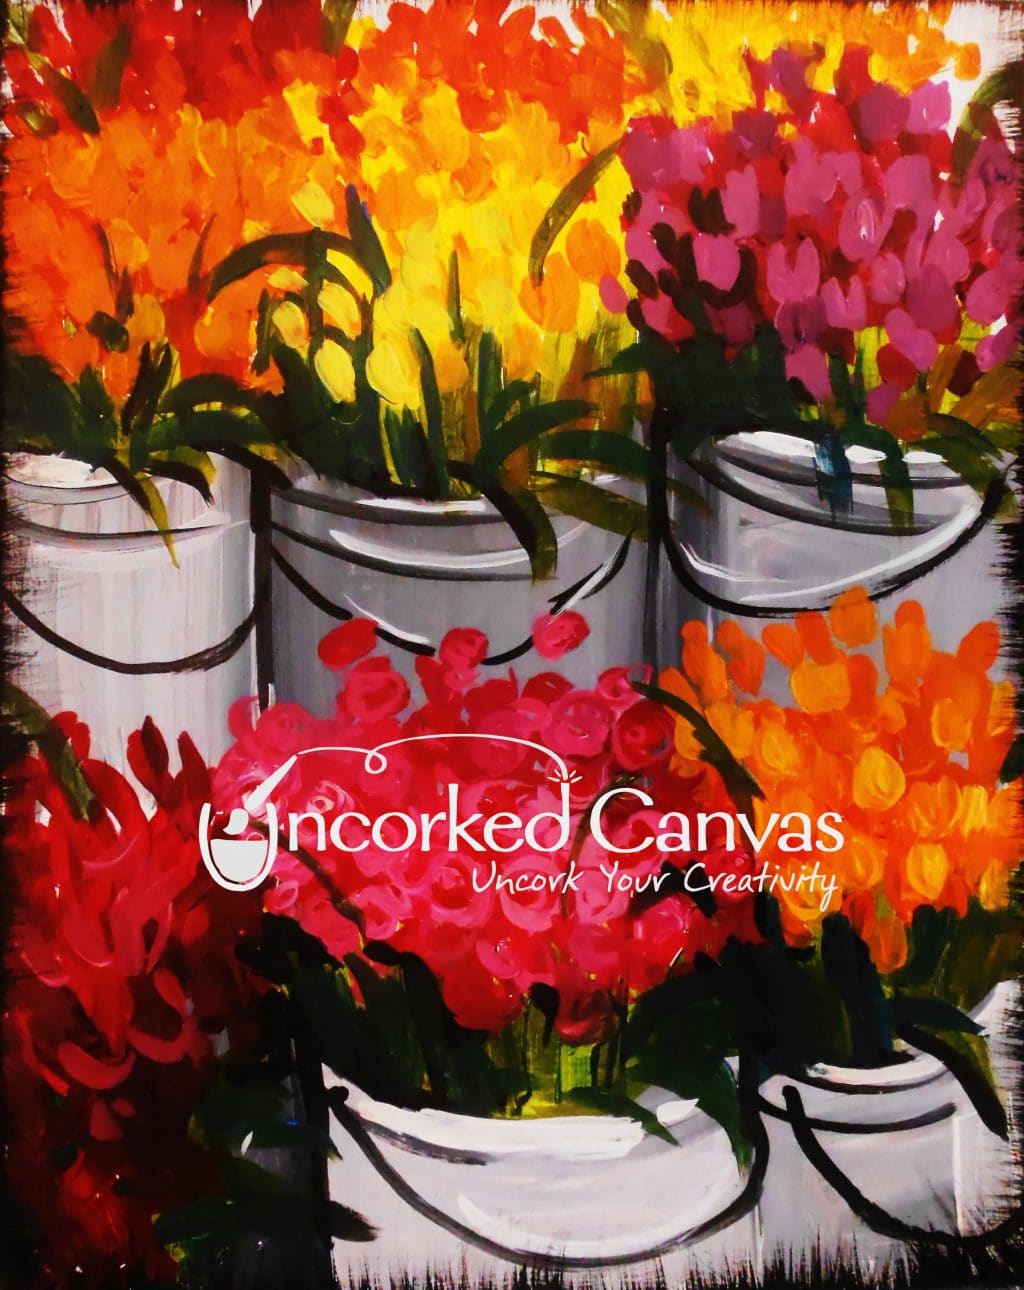 Flower Market at Uncorked Canvas is the wine and paint experience for all!